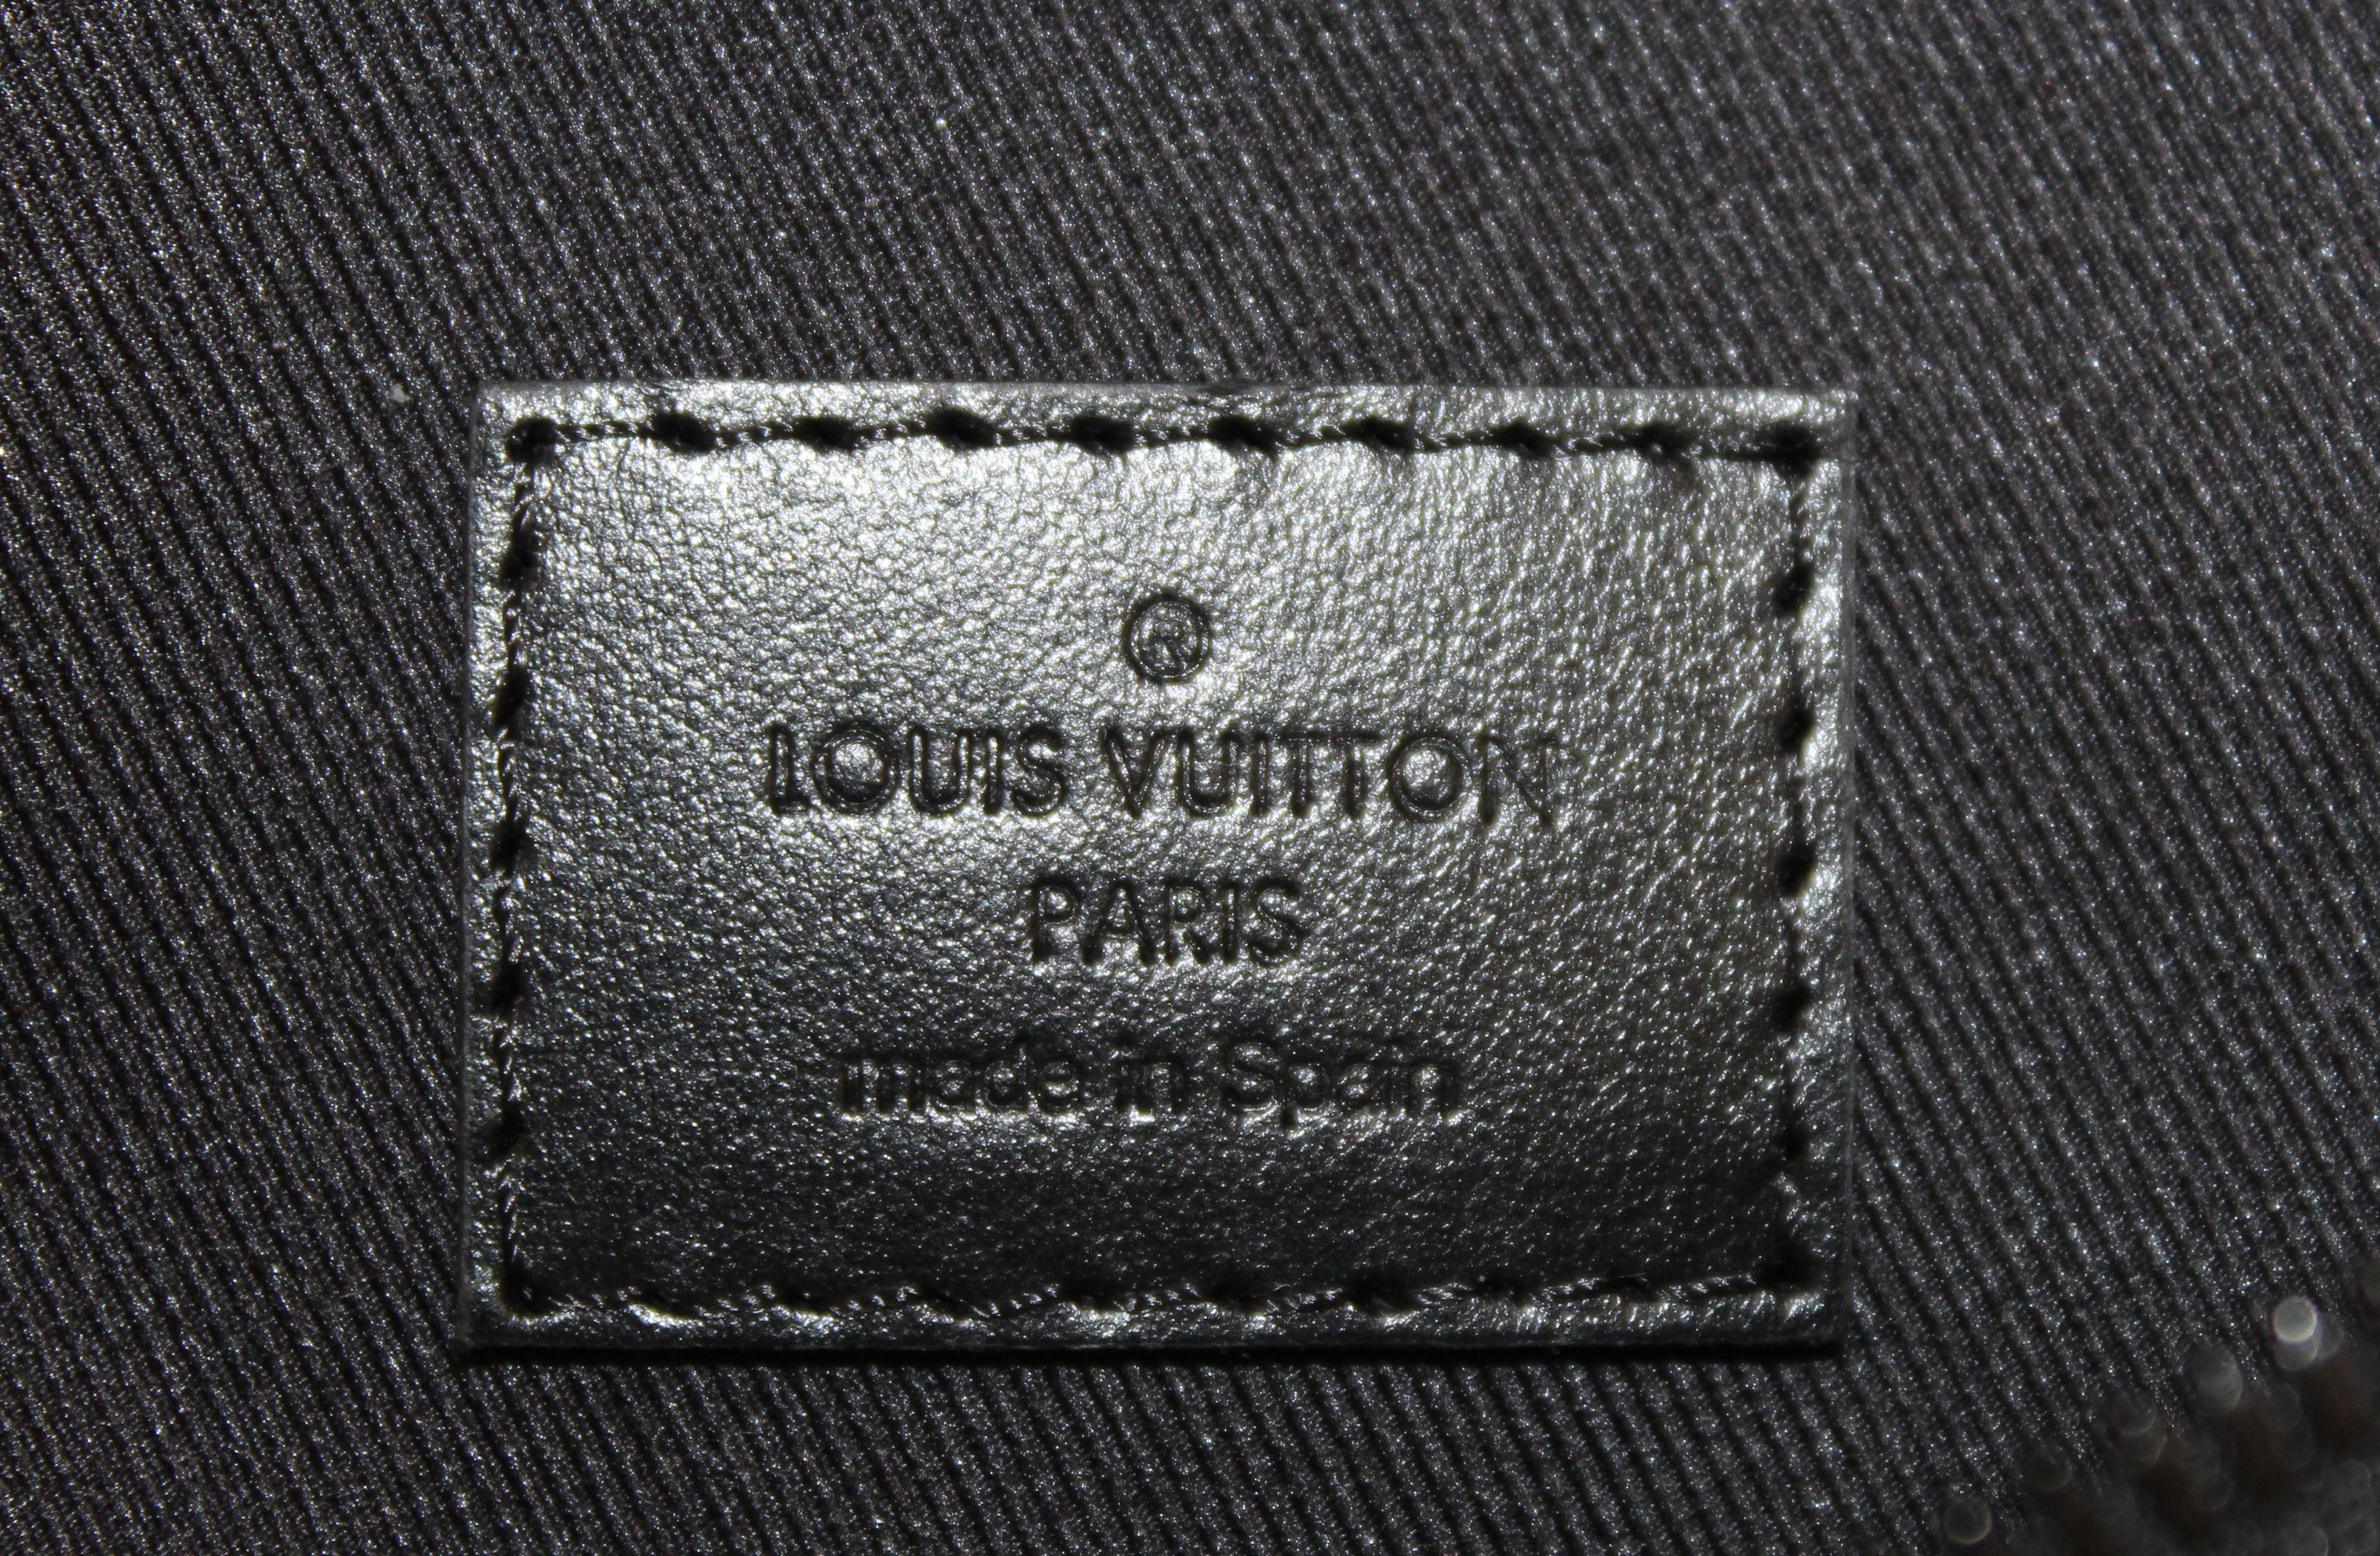 Authentic NEW Louis Vuitton Black Monogram Shadow Calf Leather Discovery Bumbag PM